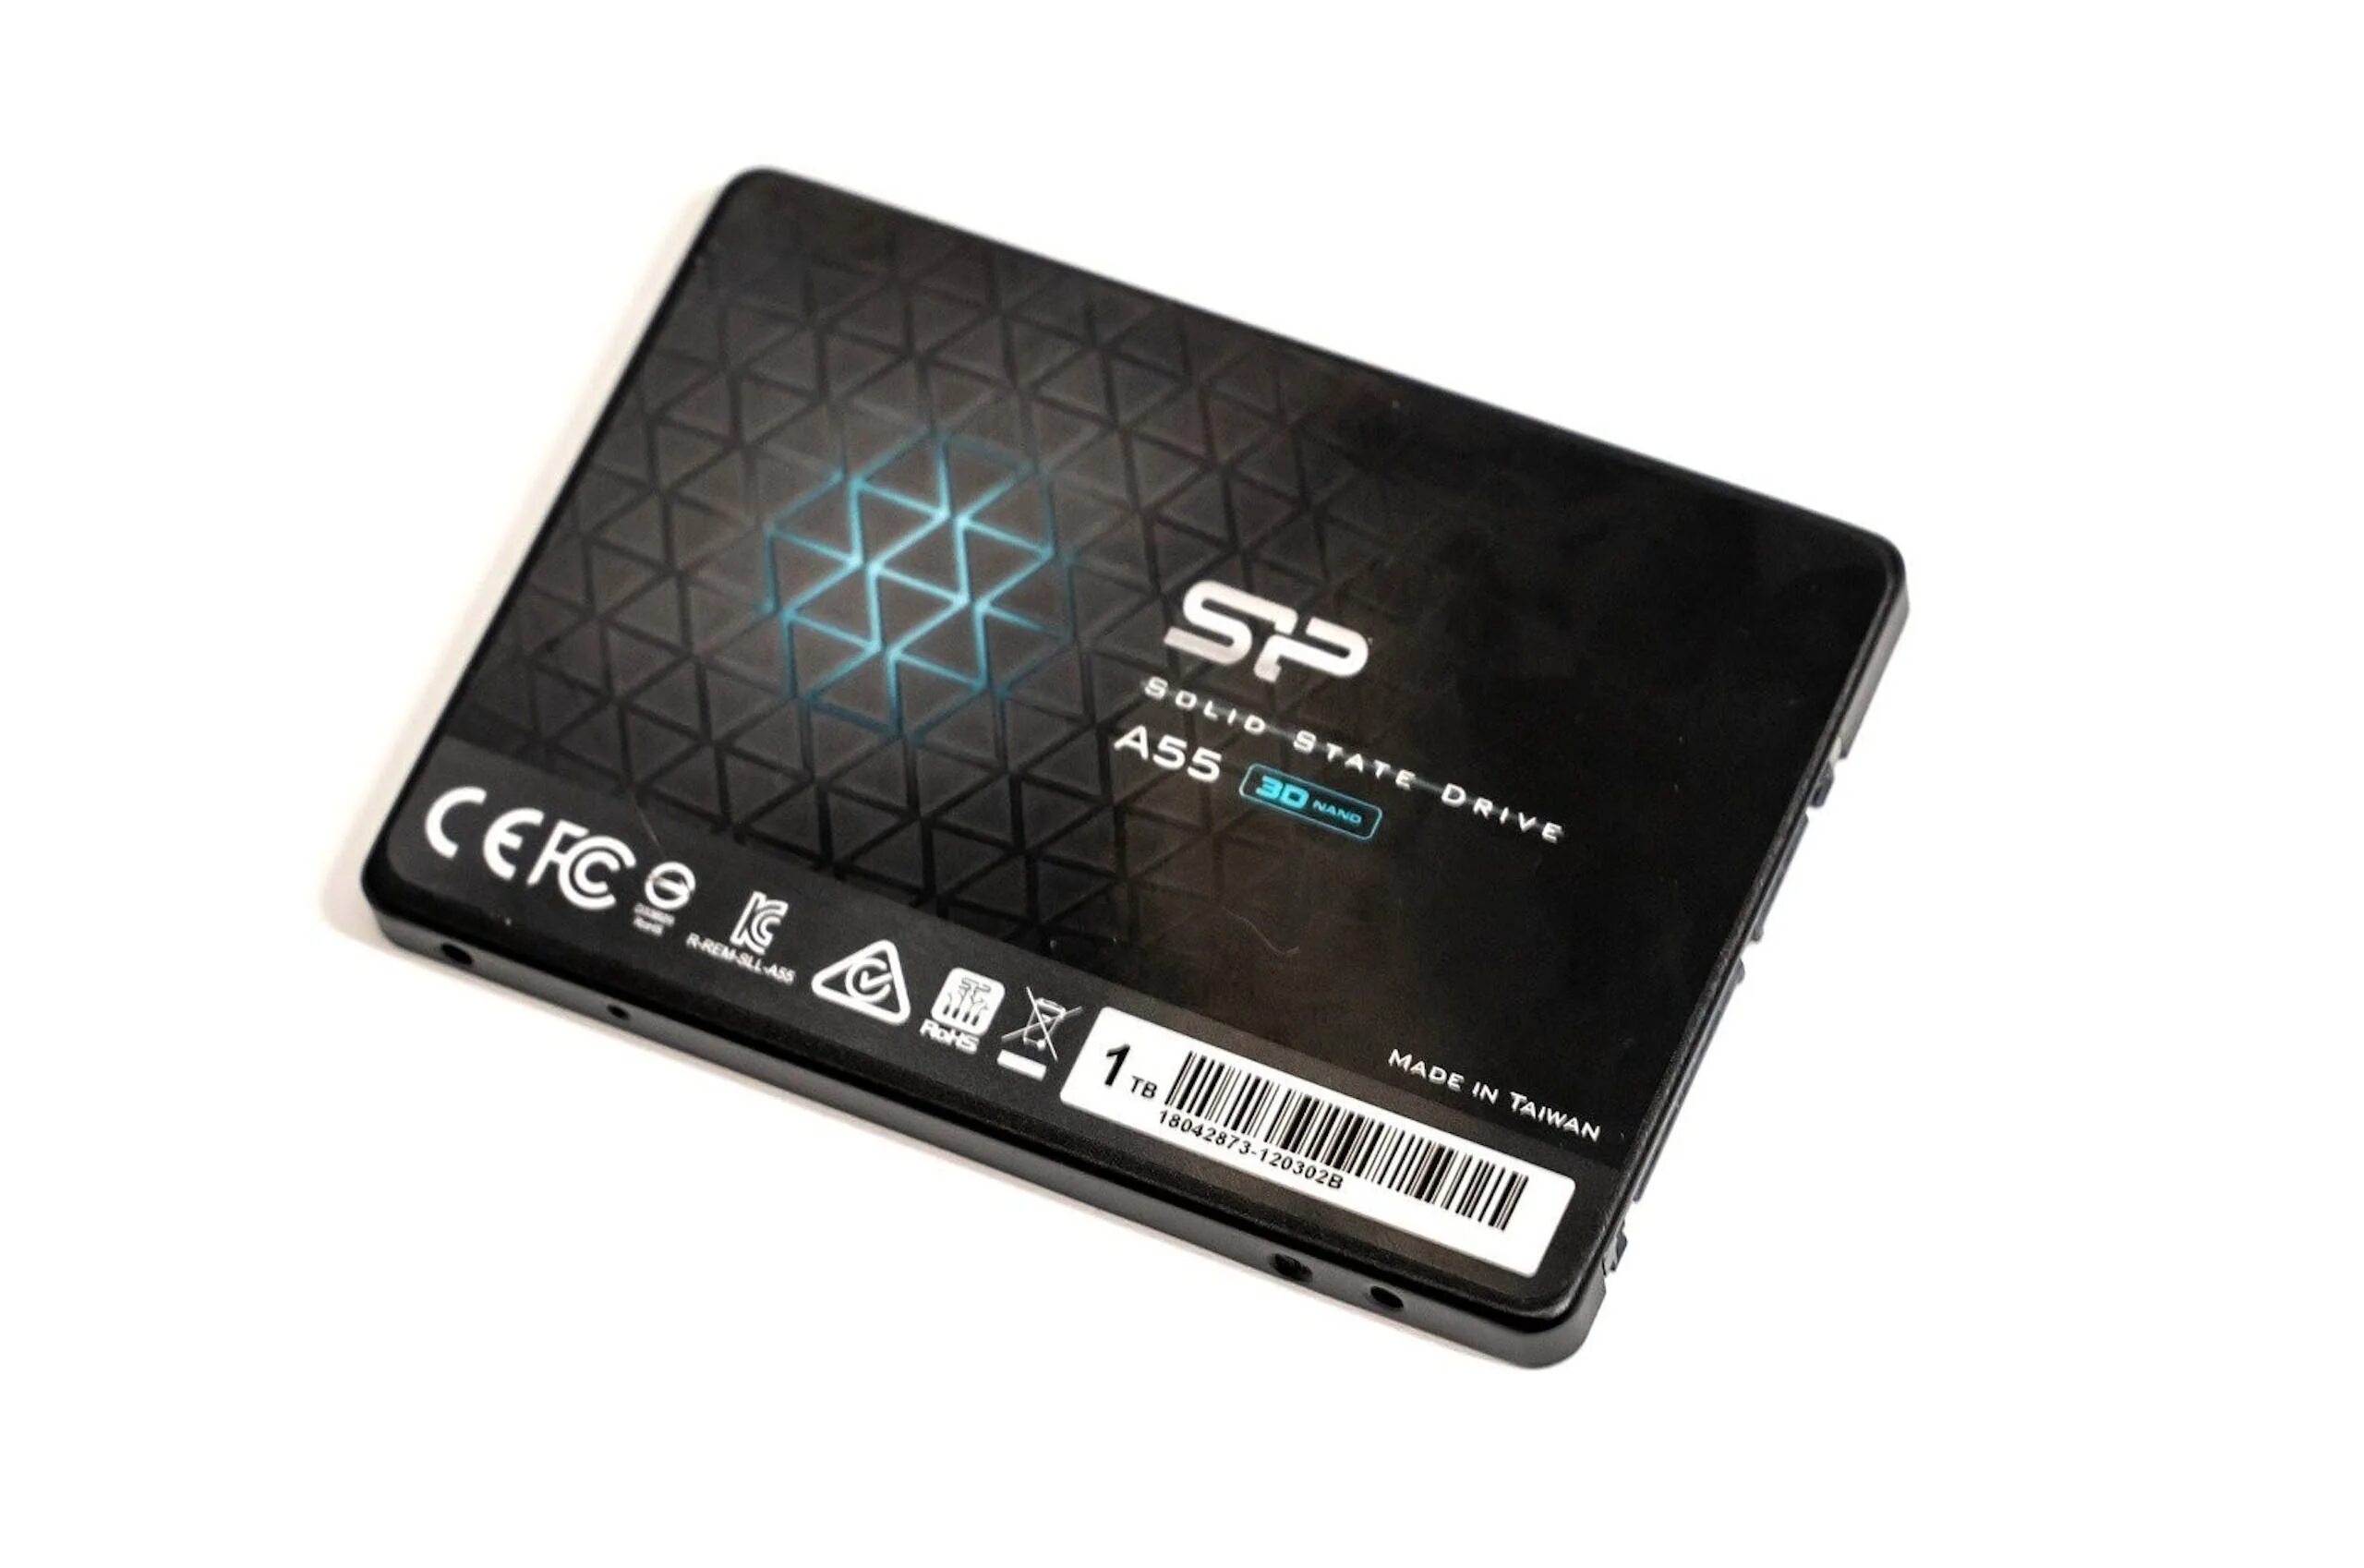 Spcc solid state. SPCC Solid State Disk 120 GB. SSD Netac 1tb. Silicon Power SSD. Ссд SPCC Solid State Disk.